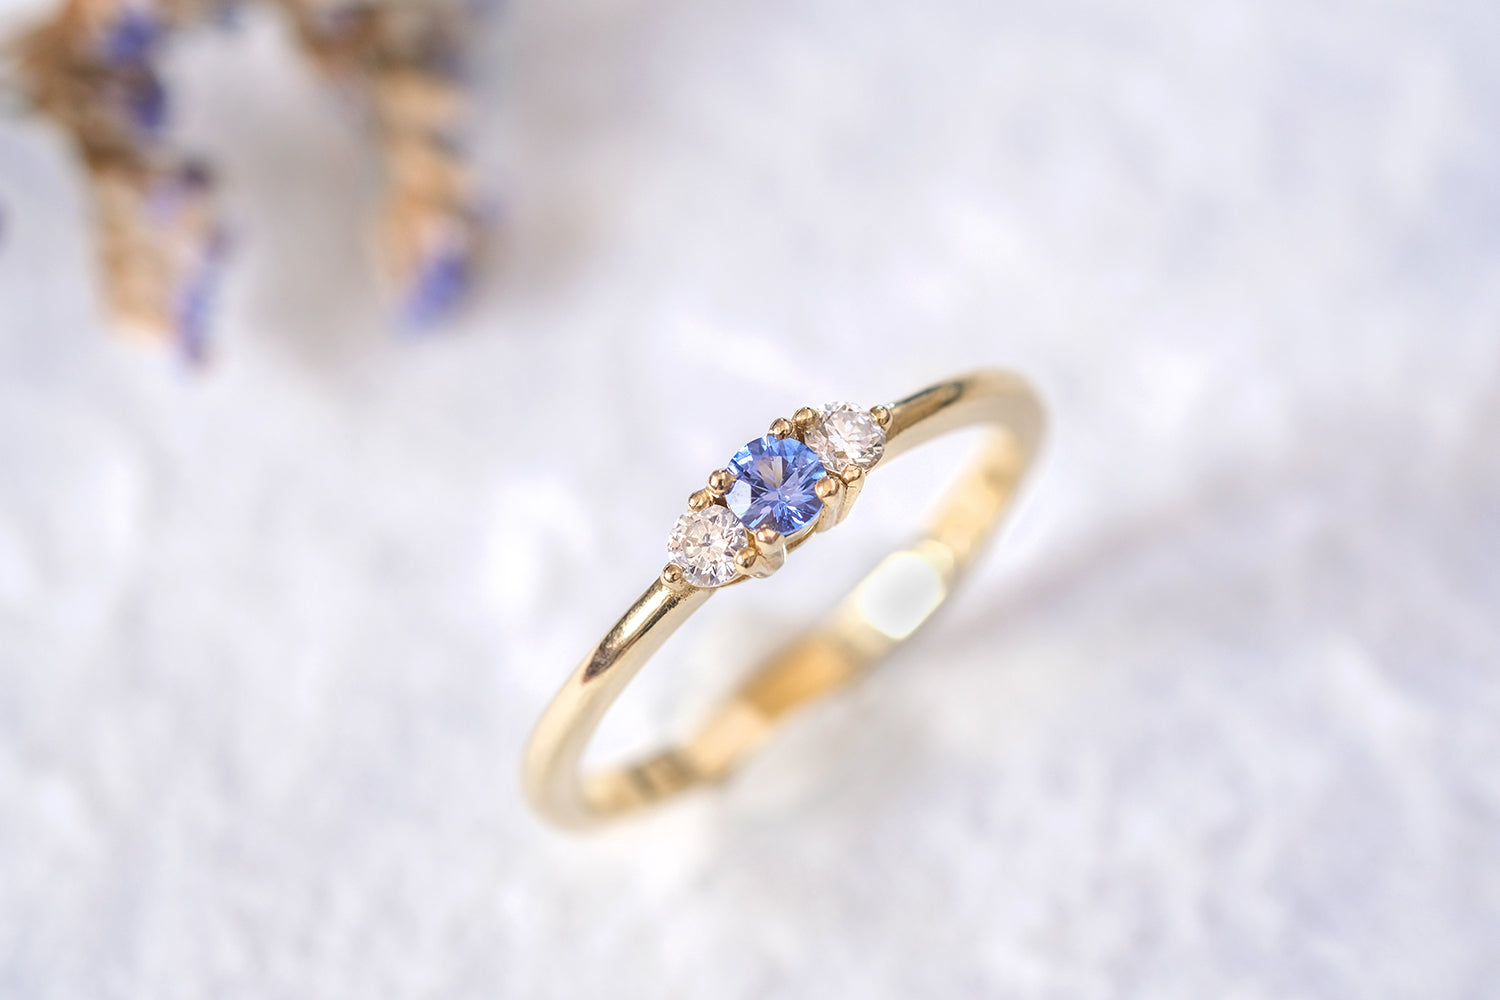 Engagement Gold Ring Set With A Sapphire And Two Diamonds